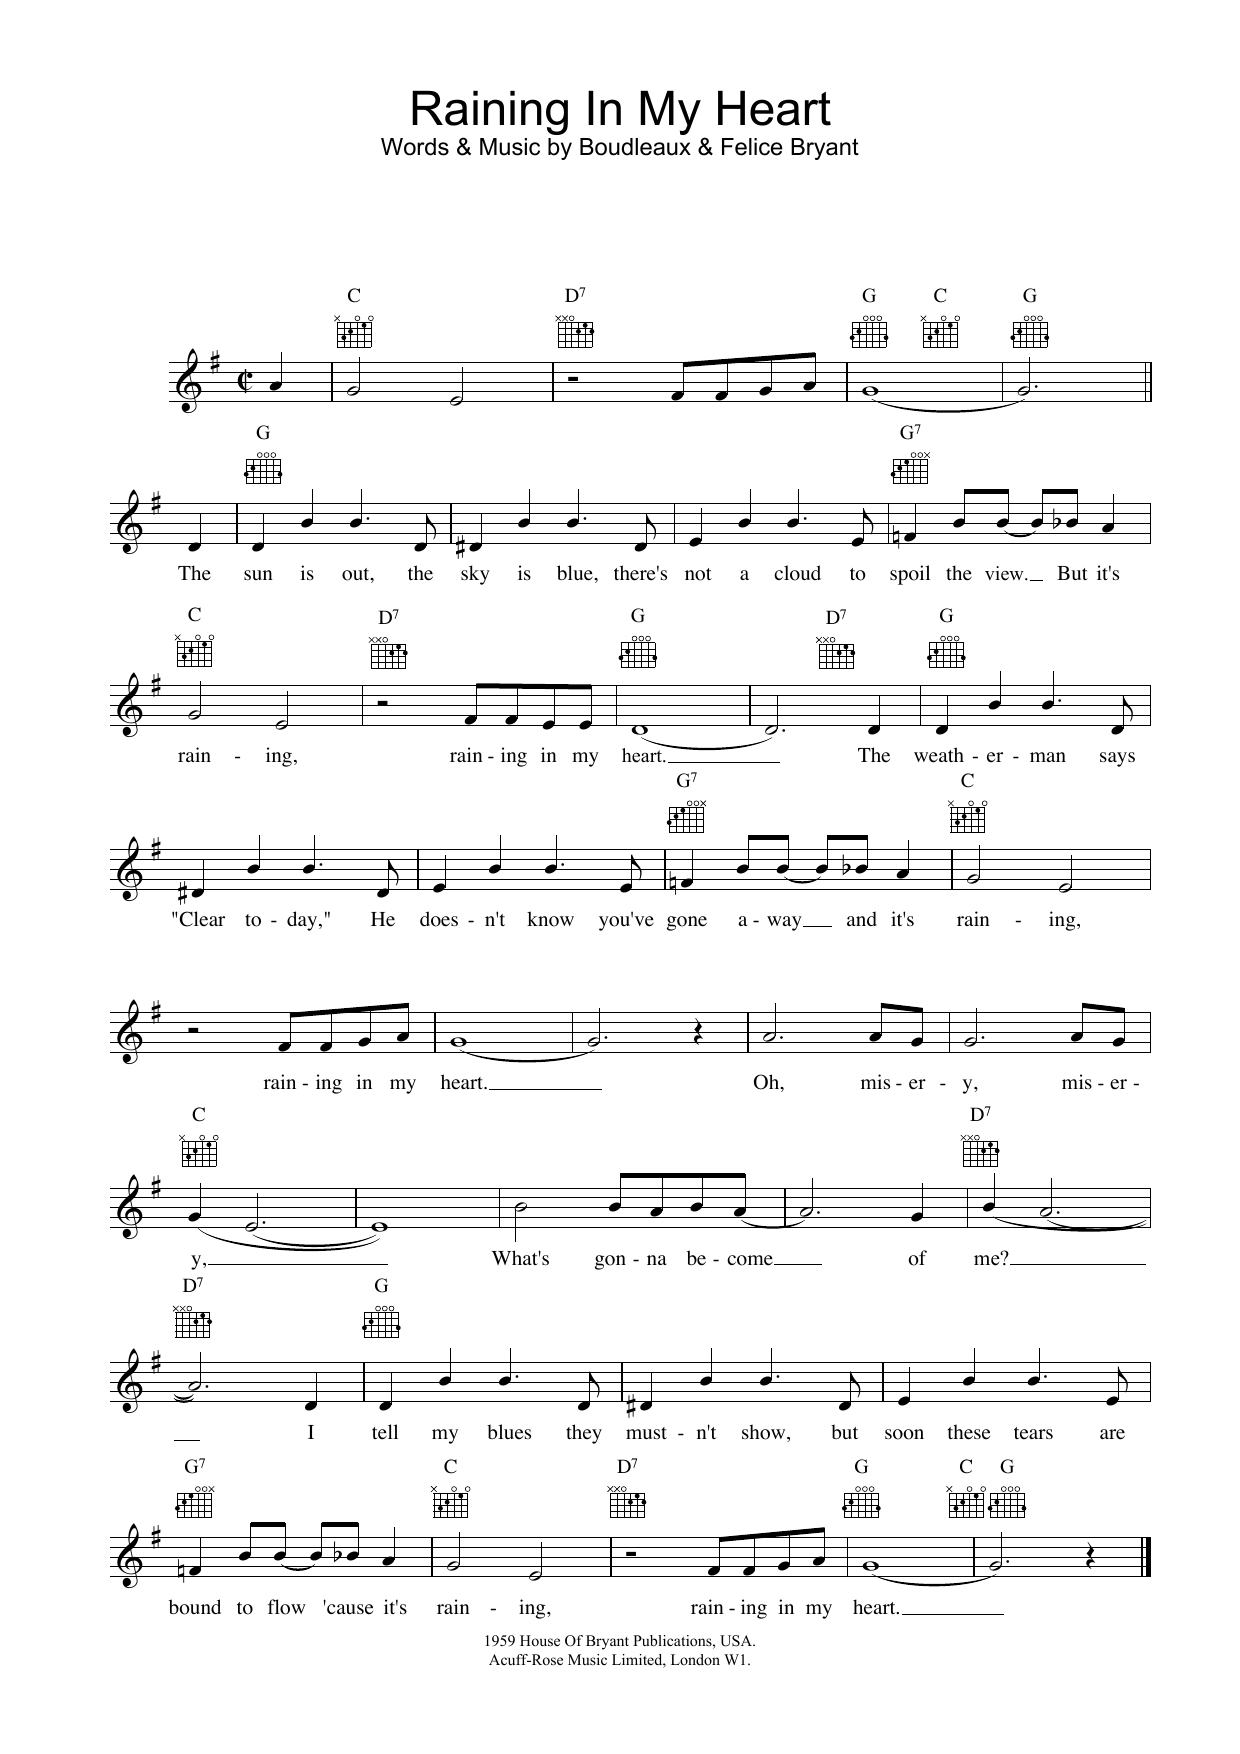 Buddy Holly Raining In My Heart sheet music notes and chords. Download Printable PDF.